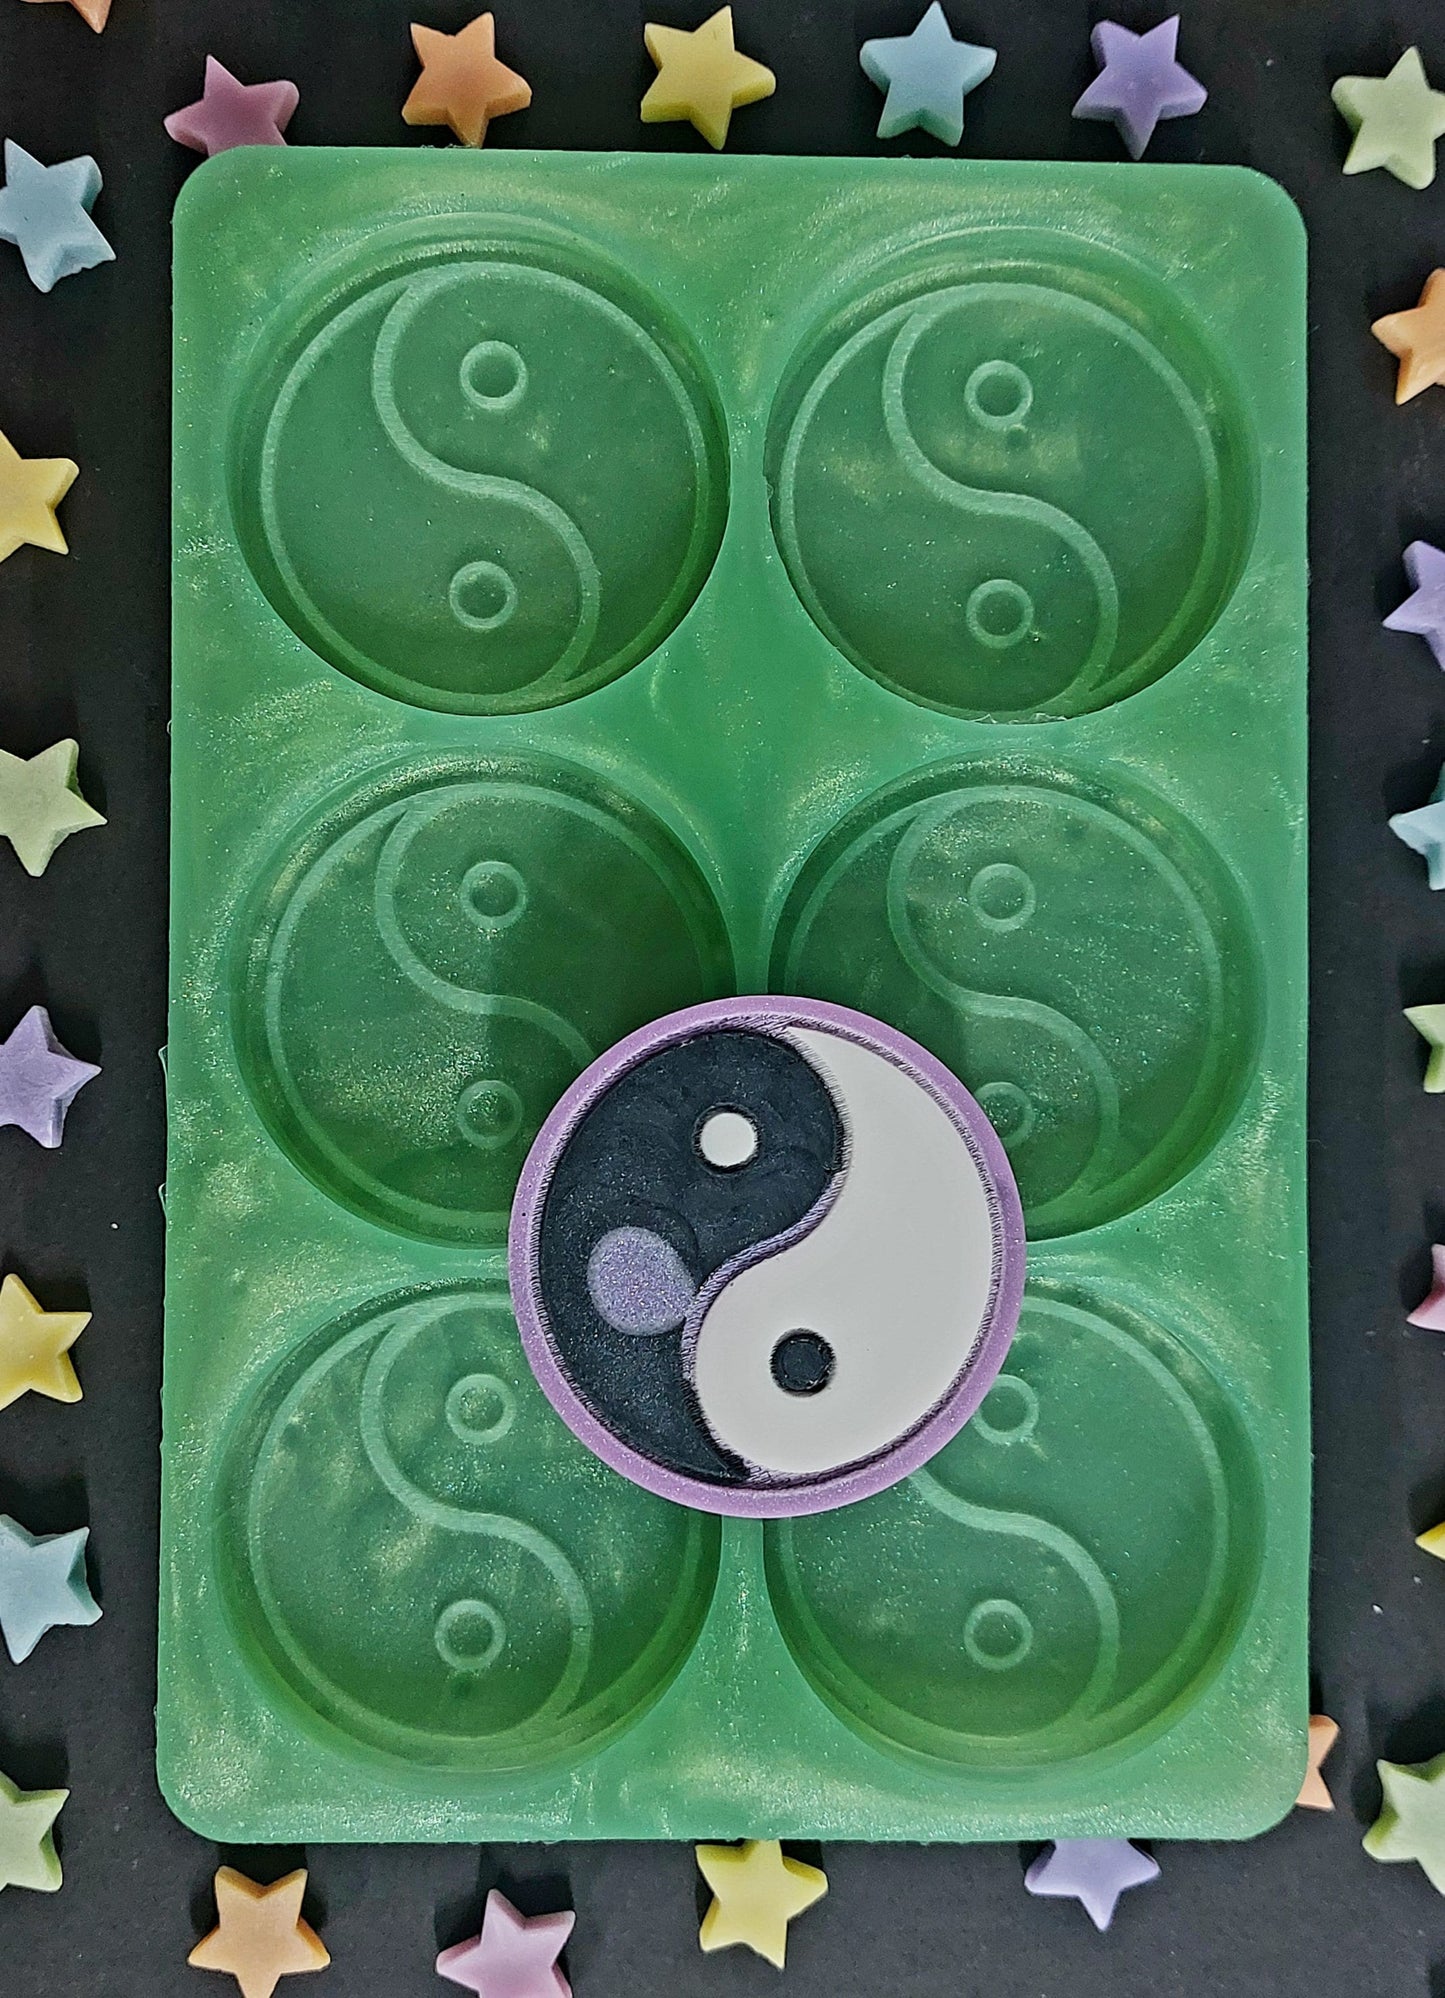 Yin and yang 6 Cell Silicone Mould for wax resin soap etc